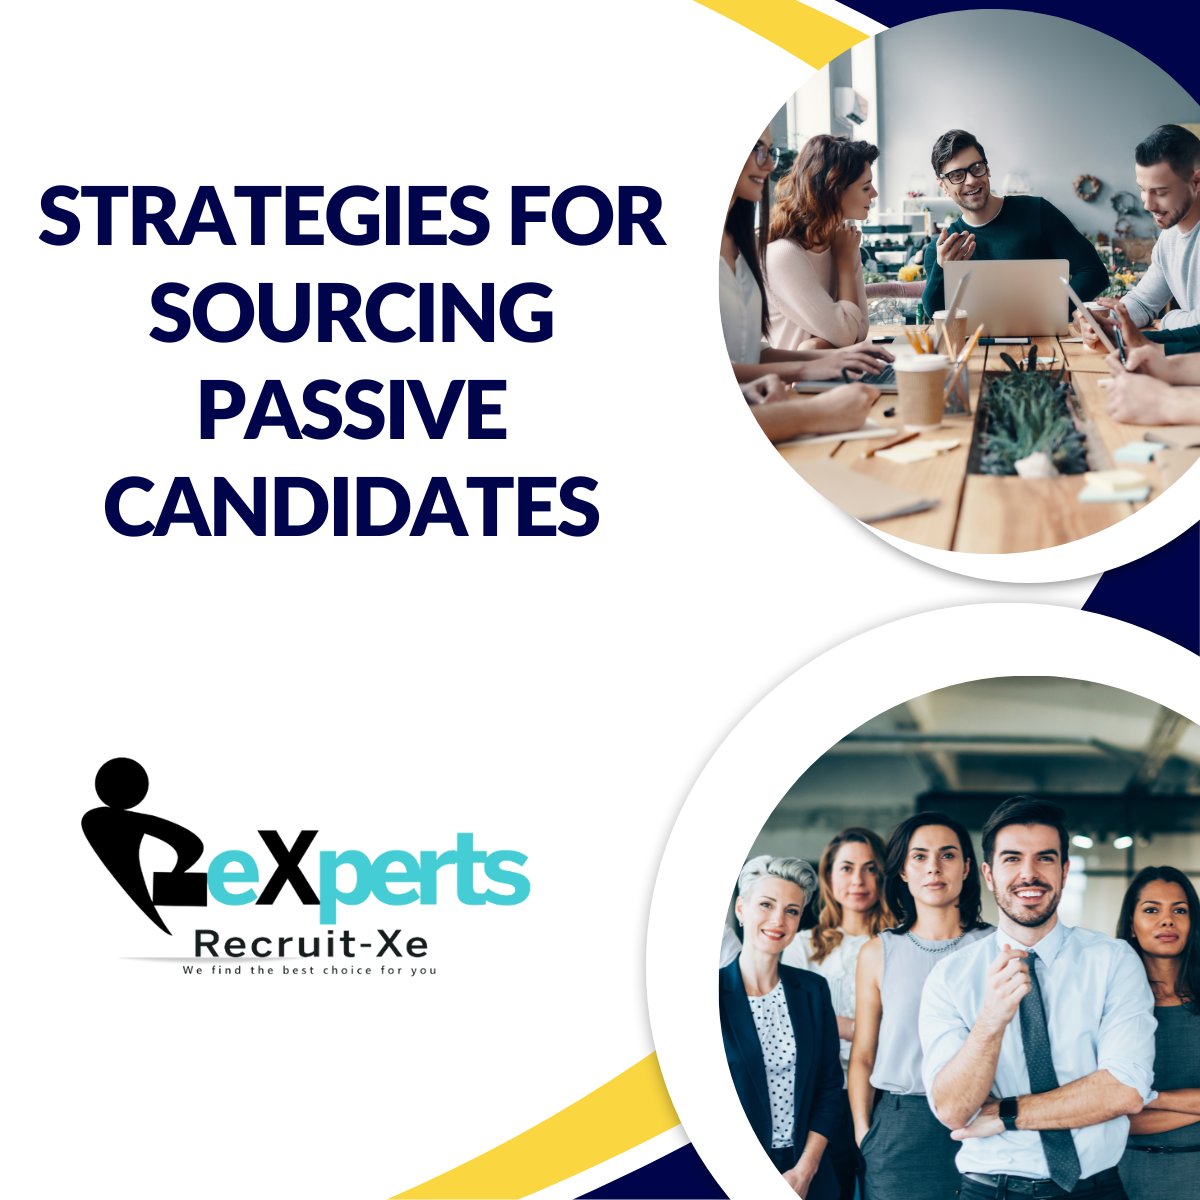 Passive candidates, also known as passive job seekers, they can use social media platforms such as LinkedIn, Twitter, and Facebook for sourcing passive candidates. #passivecandidates #headhunting #employeerecruitment